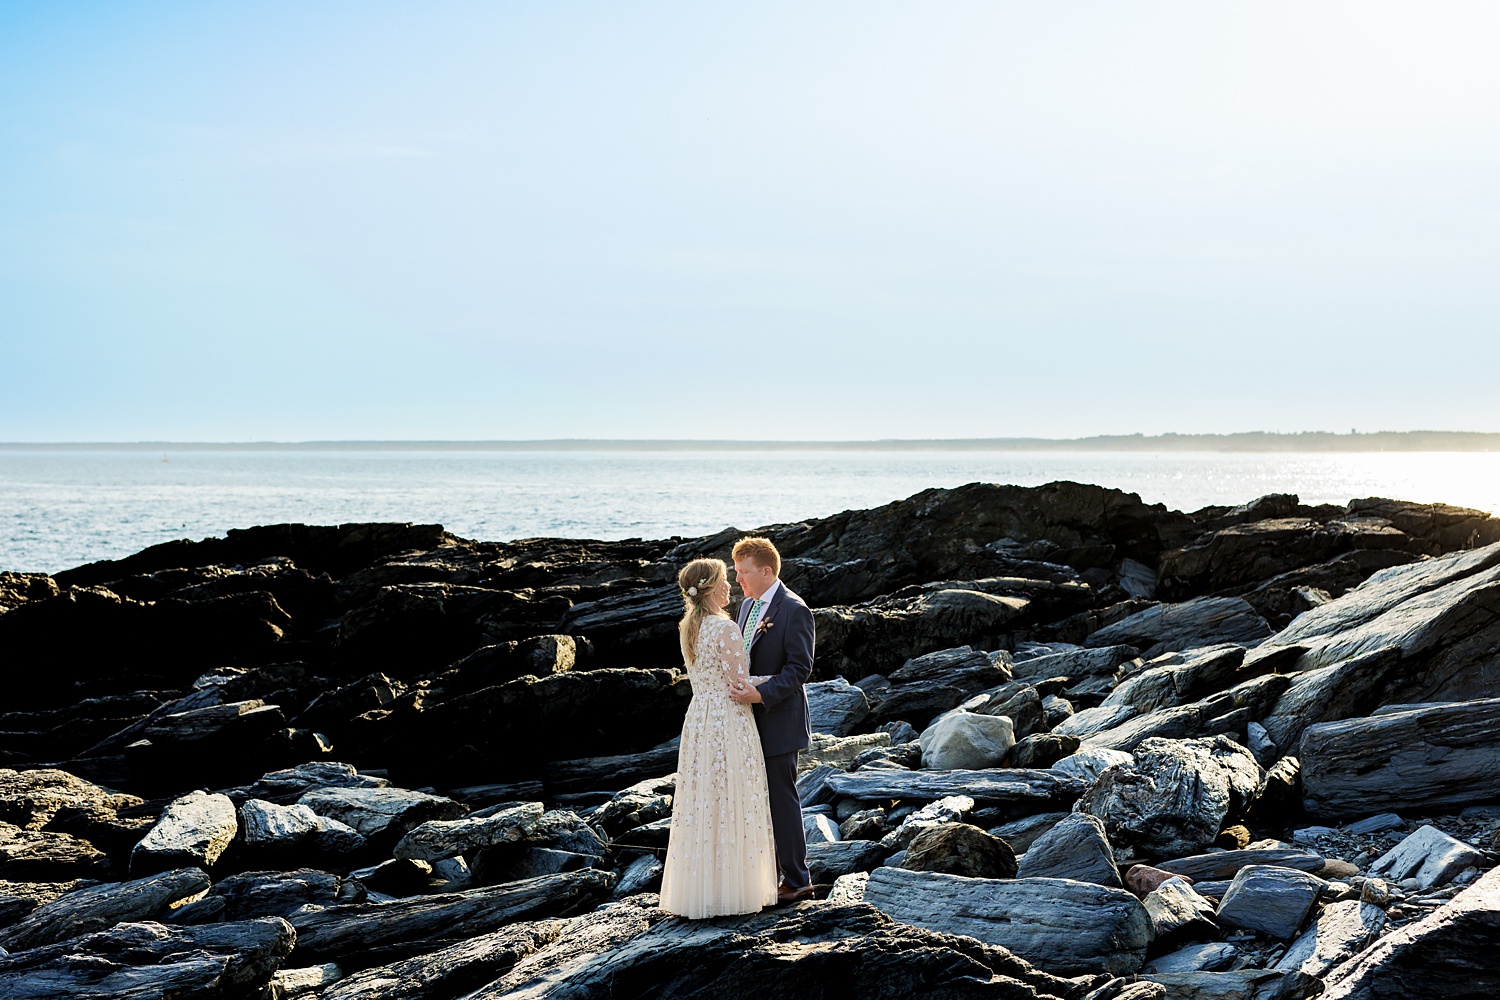 The bride and groom out on the rocks on Prout's Neck Maine